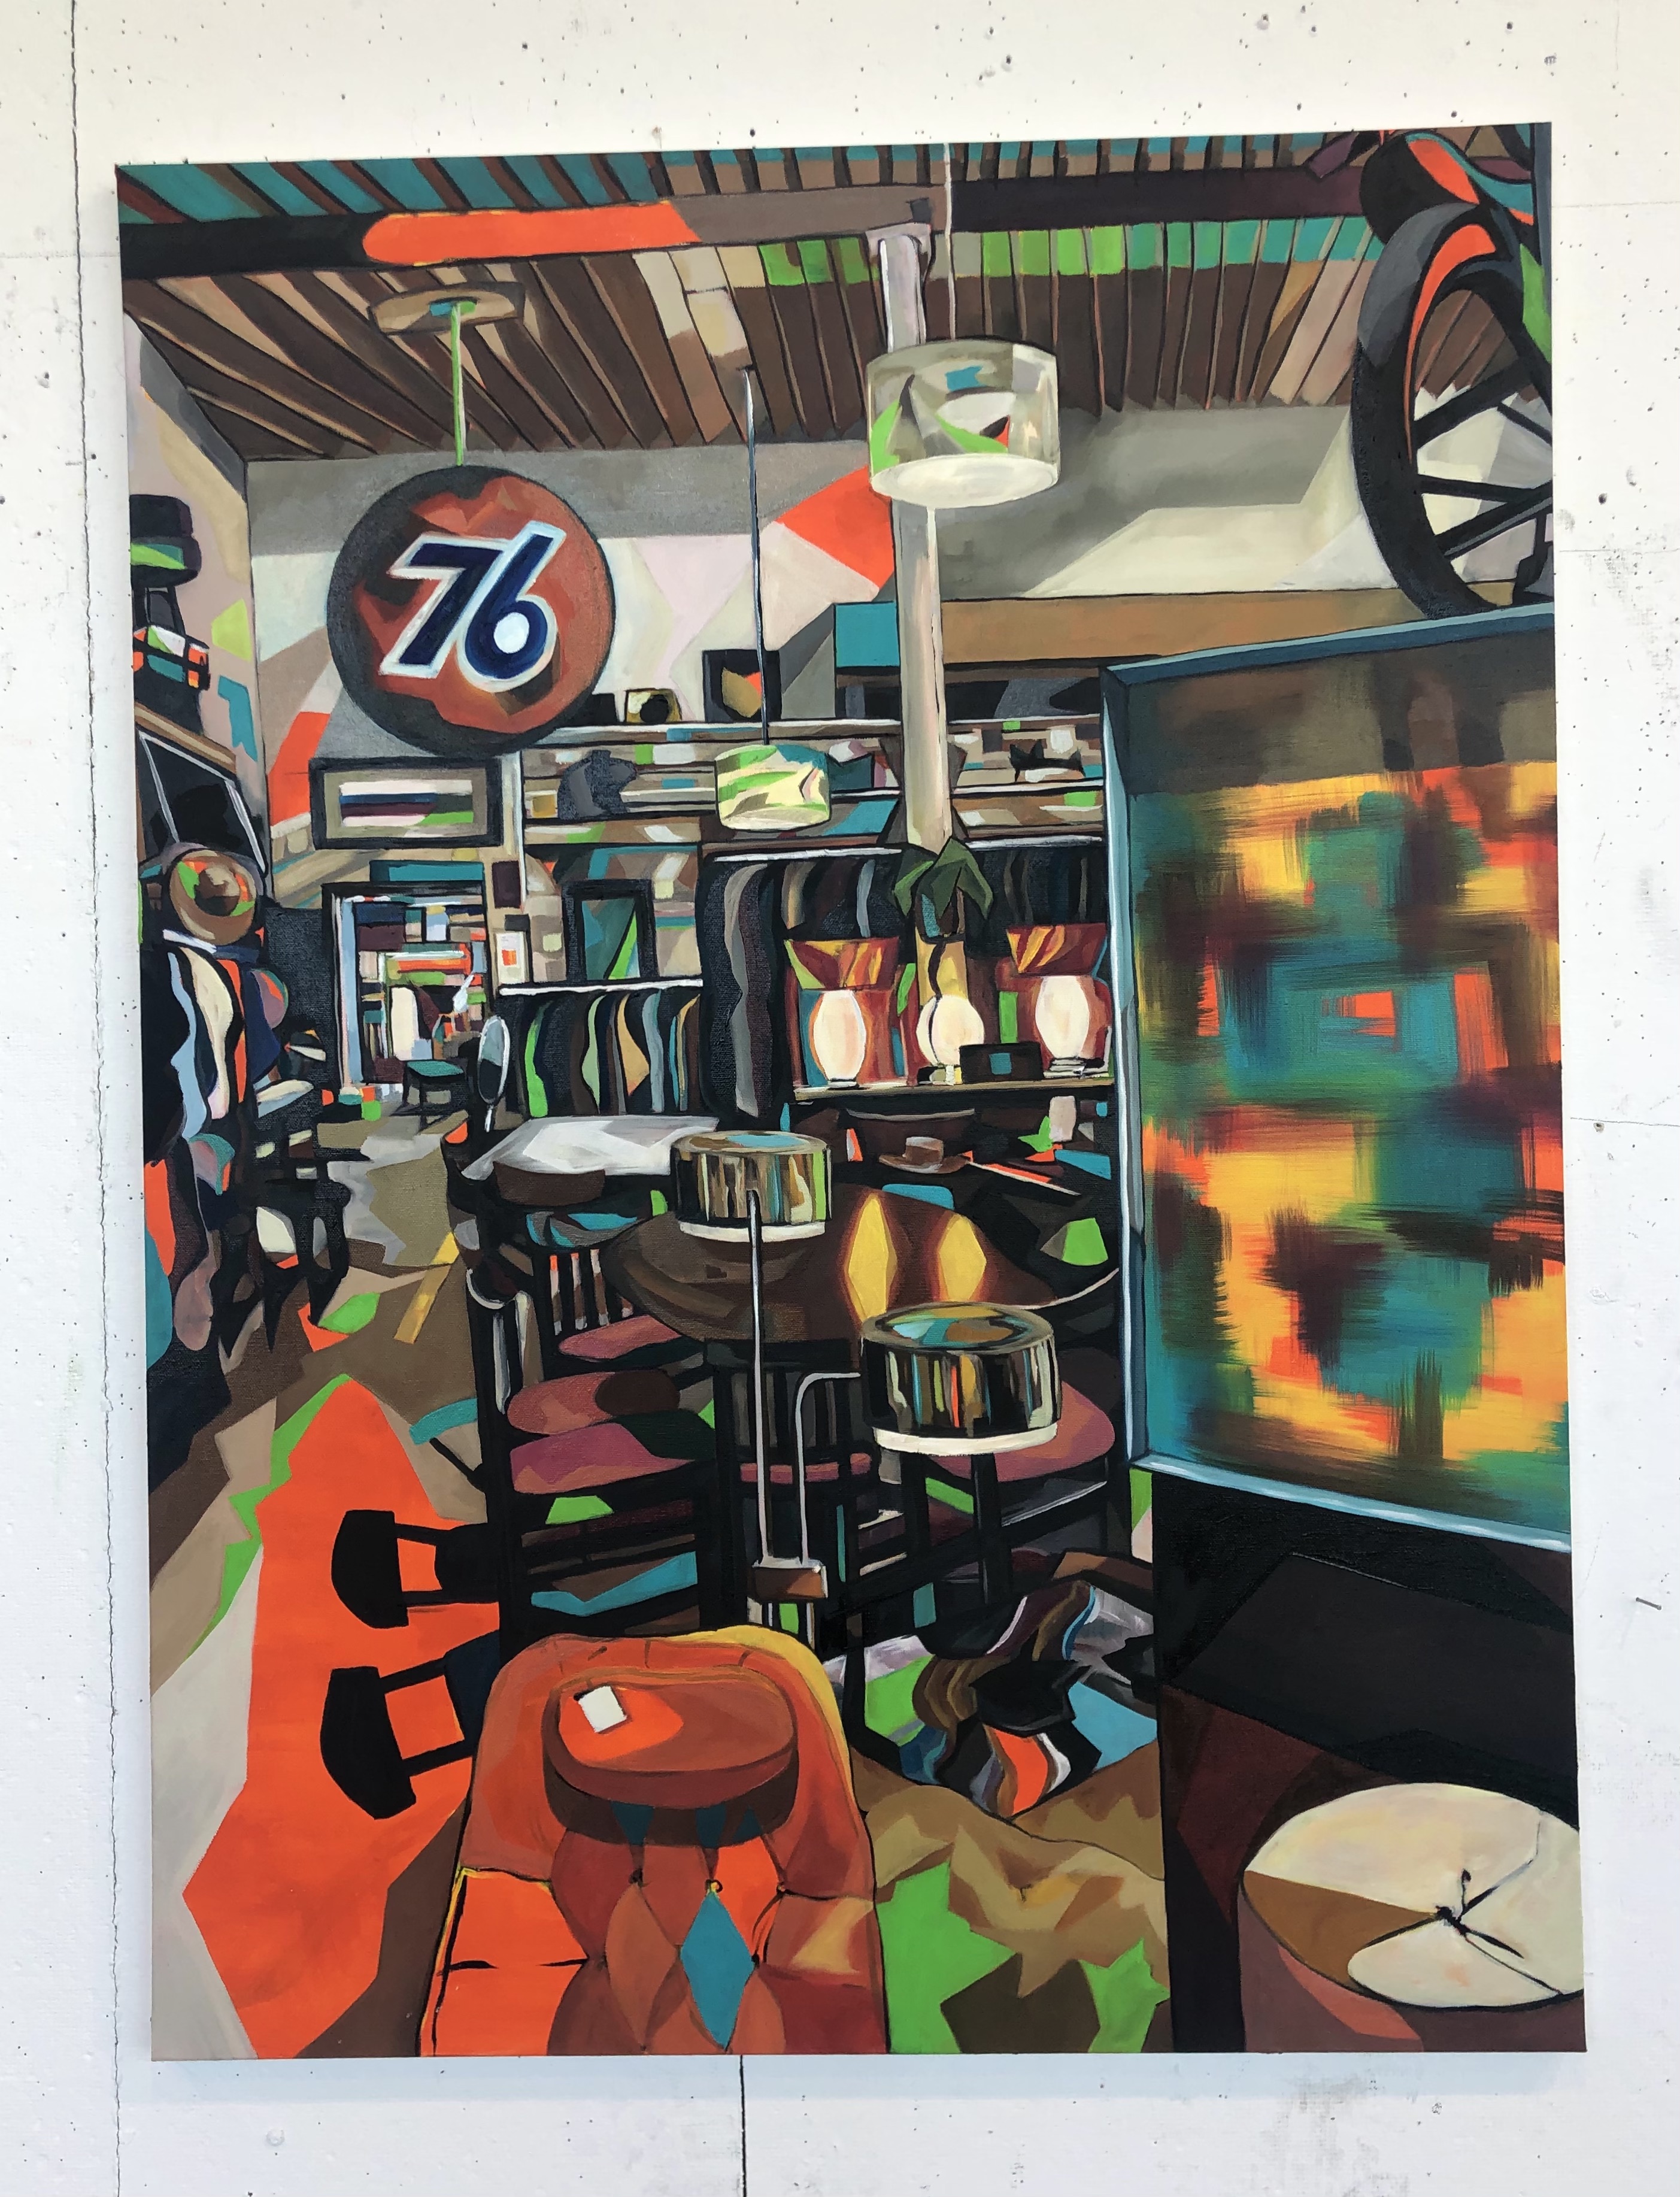 Painting of an antique shop. Every bit of space is filled on the several shelves and tables with objects of every color. In the bottom left corner are two bright orange objects, in the upper left corner is a circular sign that reads "76." The colors are bright and chaotic, giving a sense of busyness.